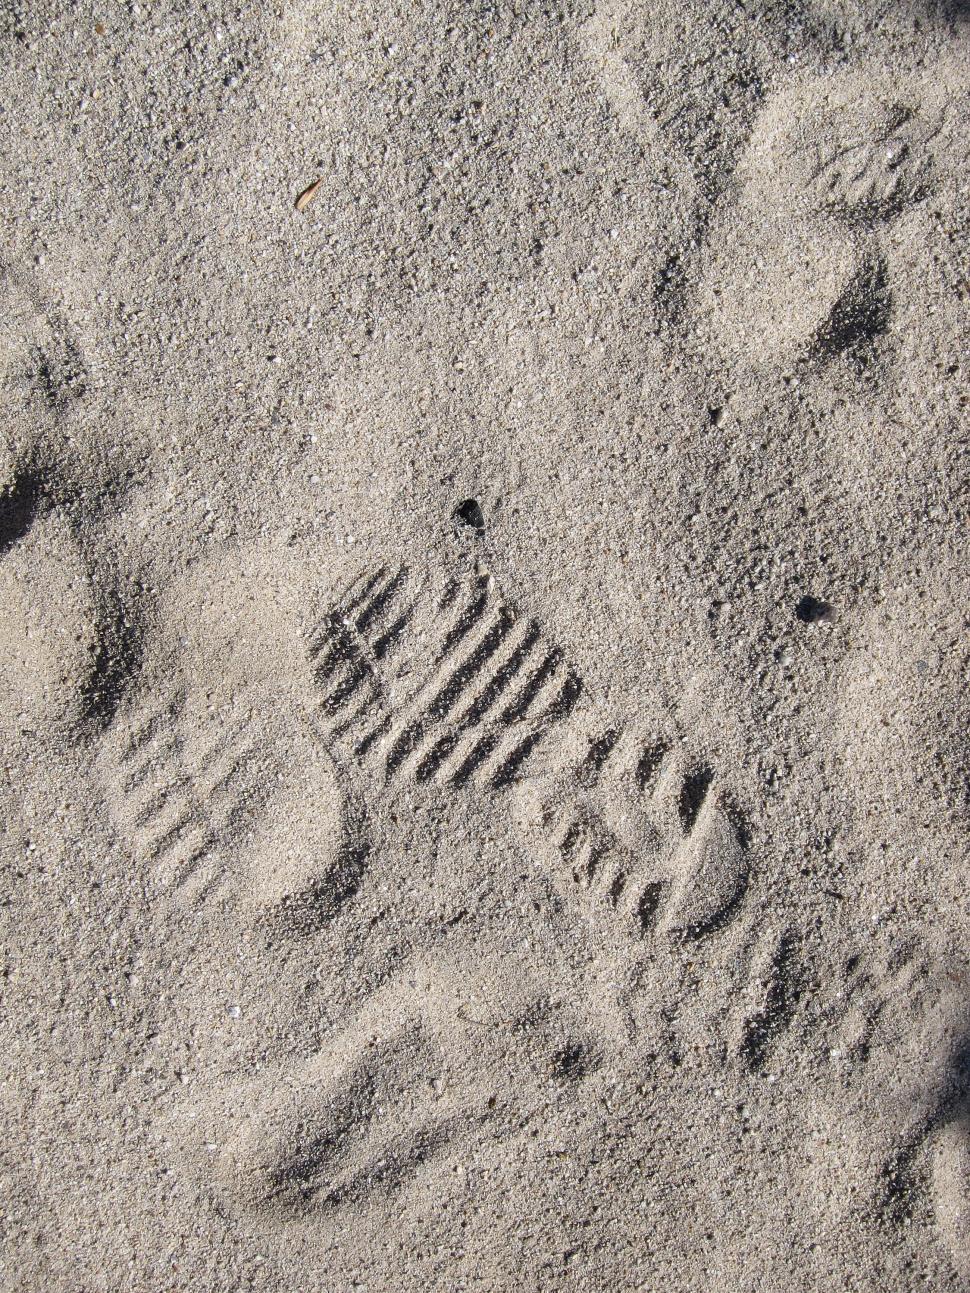 Free Image of Footprint in Sand 